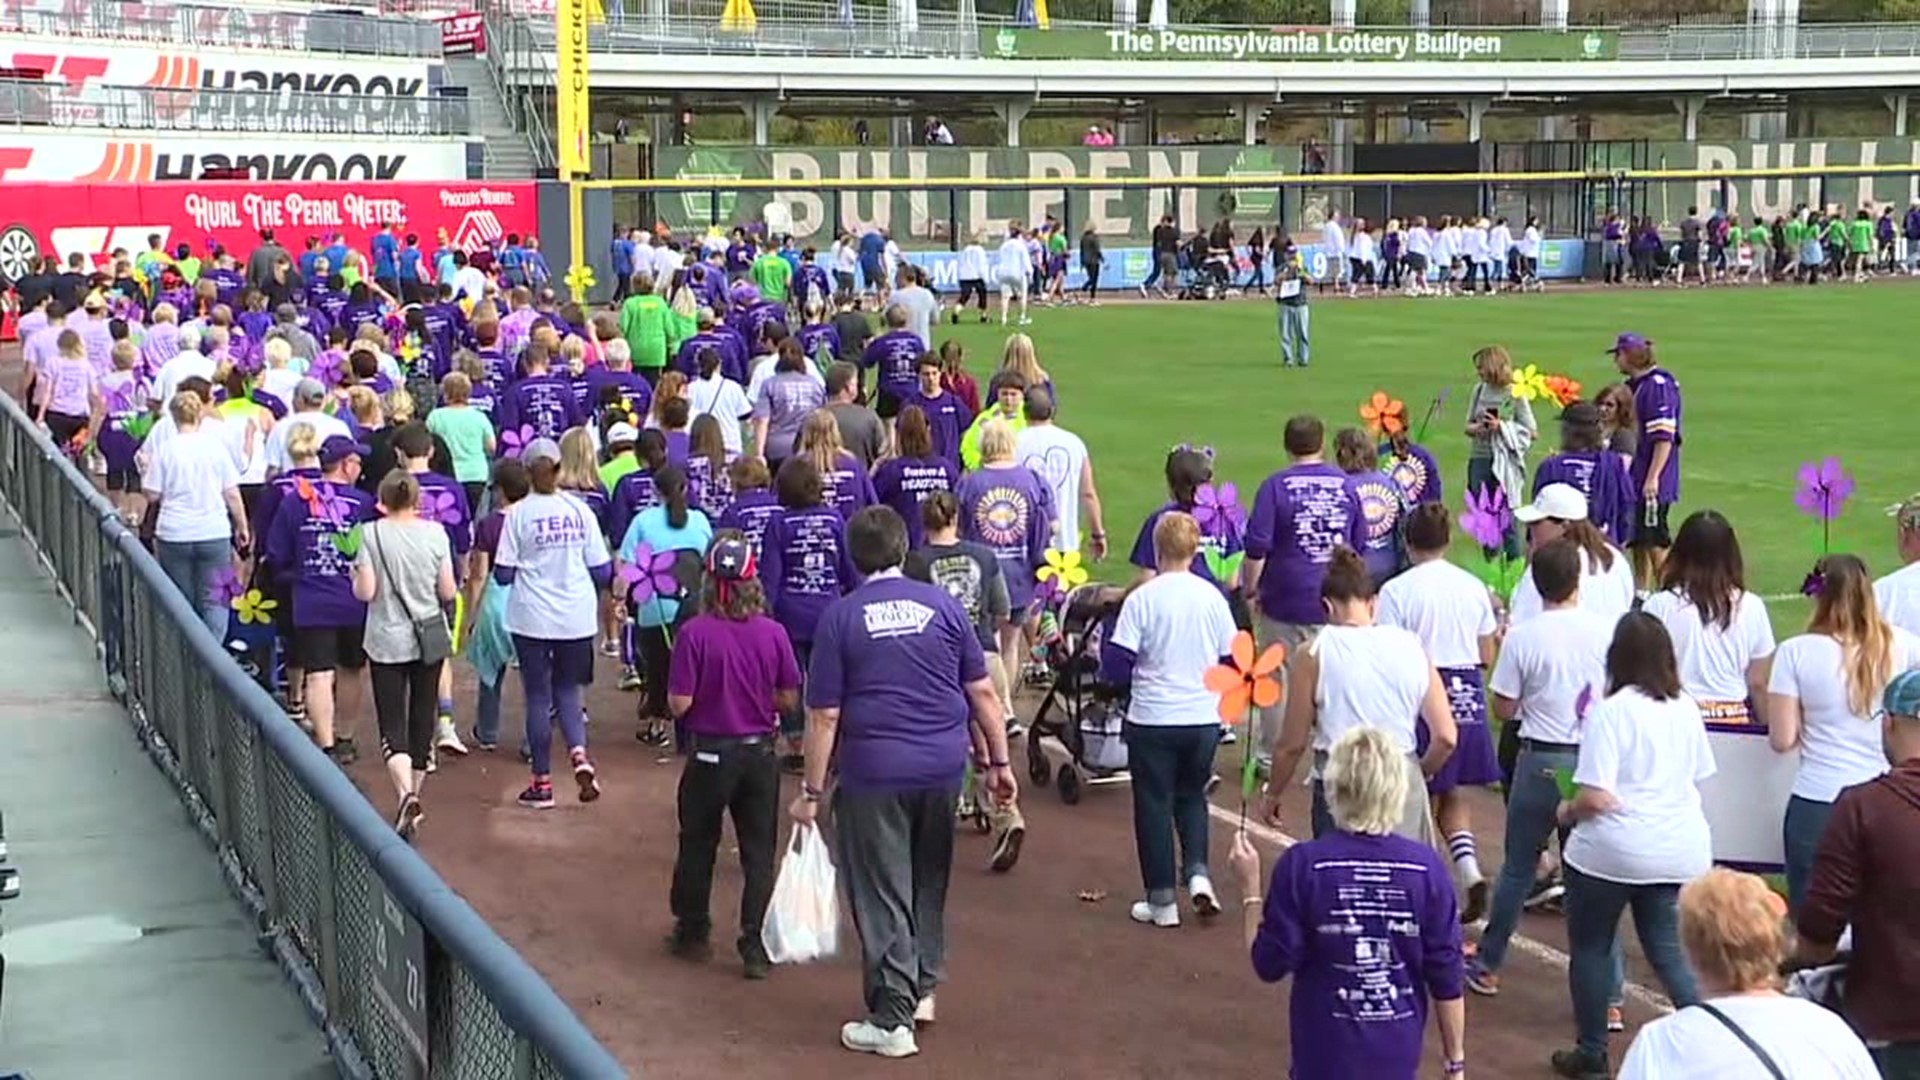 This weekend, hundreds of advocates for Alzheimer's will walk in an effort to raise money to end the disease.